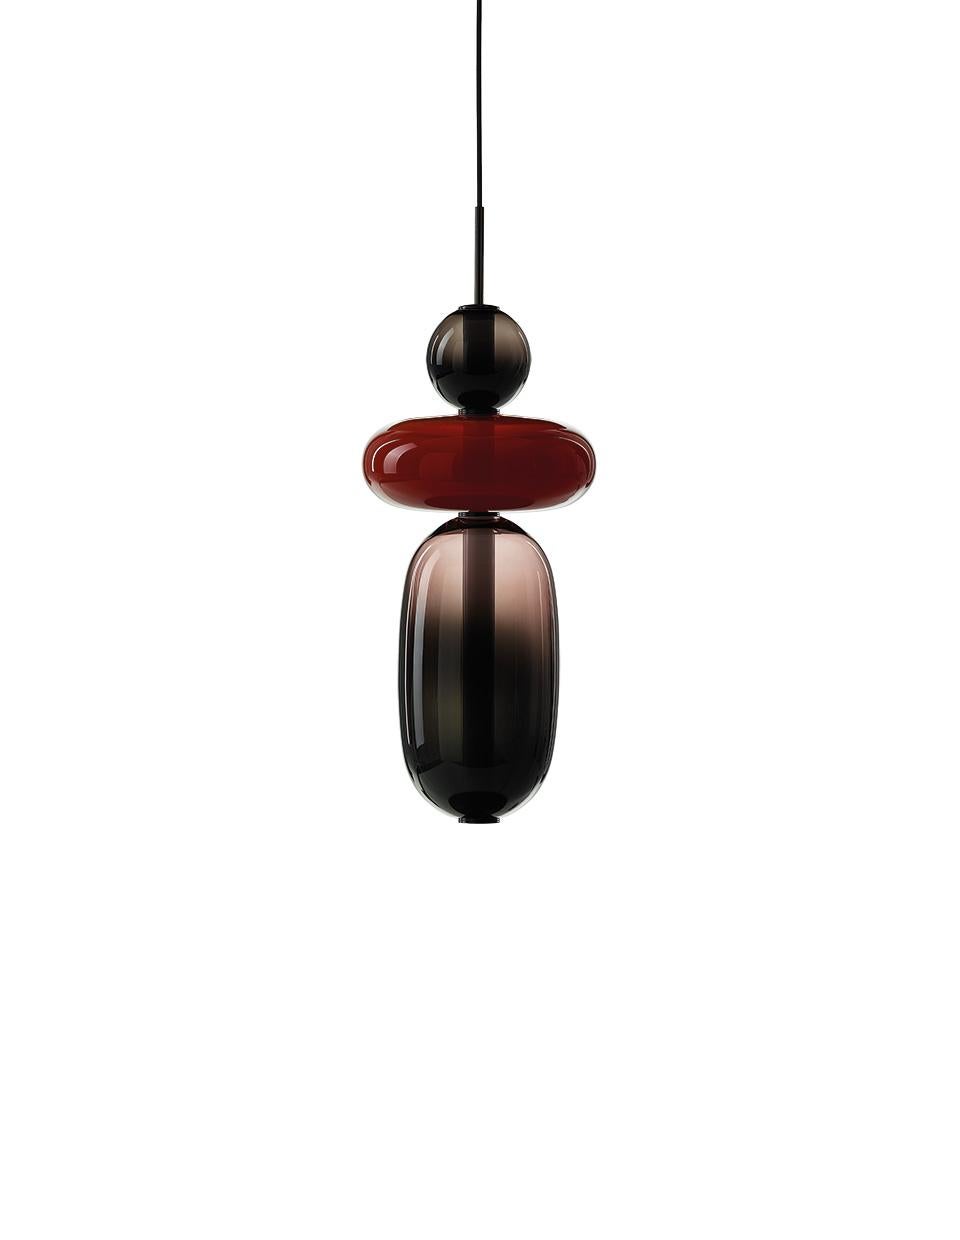 Contemporary Blown Crystal Glass Pendant - Pebbles by Boris Klimek for Bomma

Pebbles are reminders of exceptional moments or favorite places. Their diverse shapes and colors inspired BOMMA’s playful collection that invites you to express your